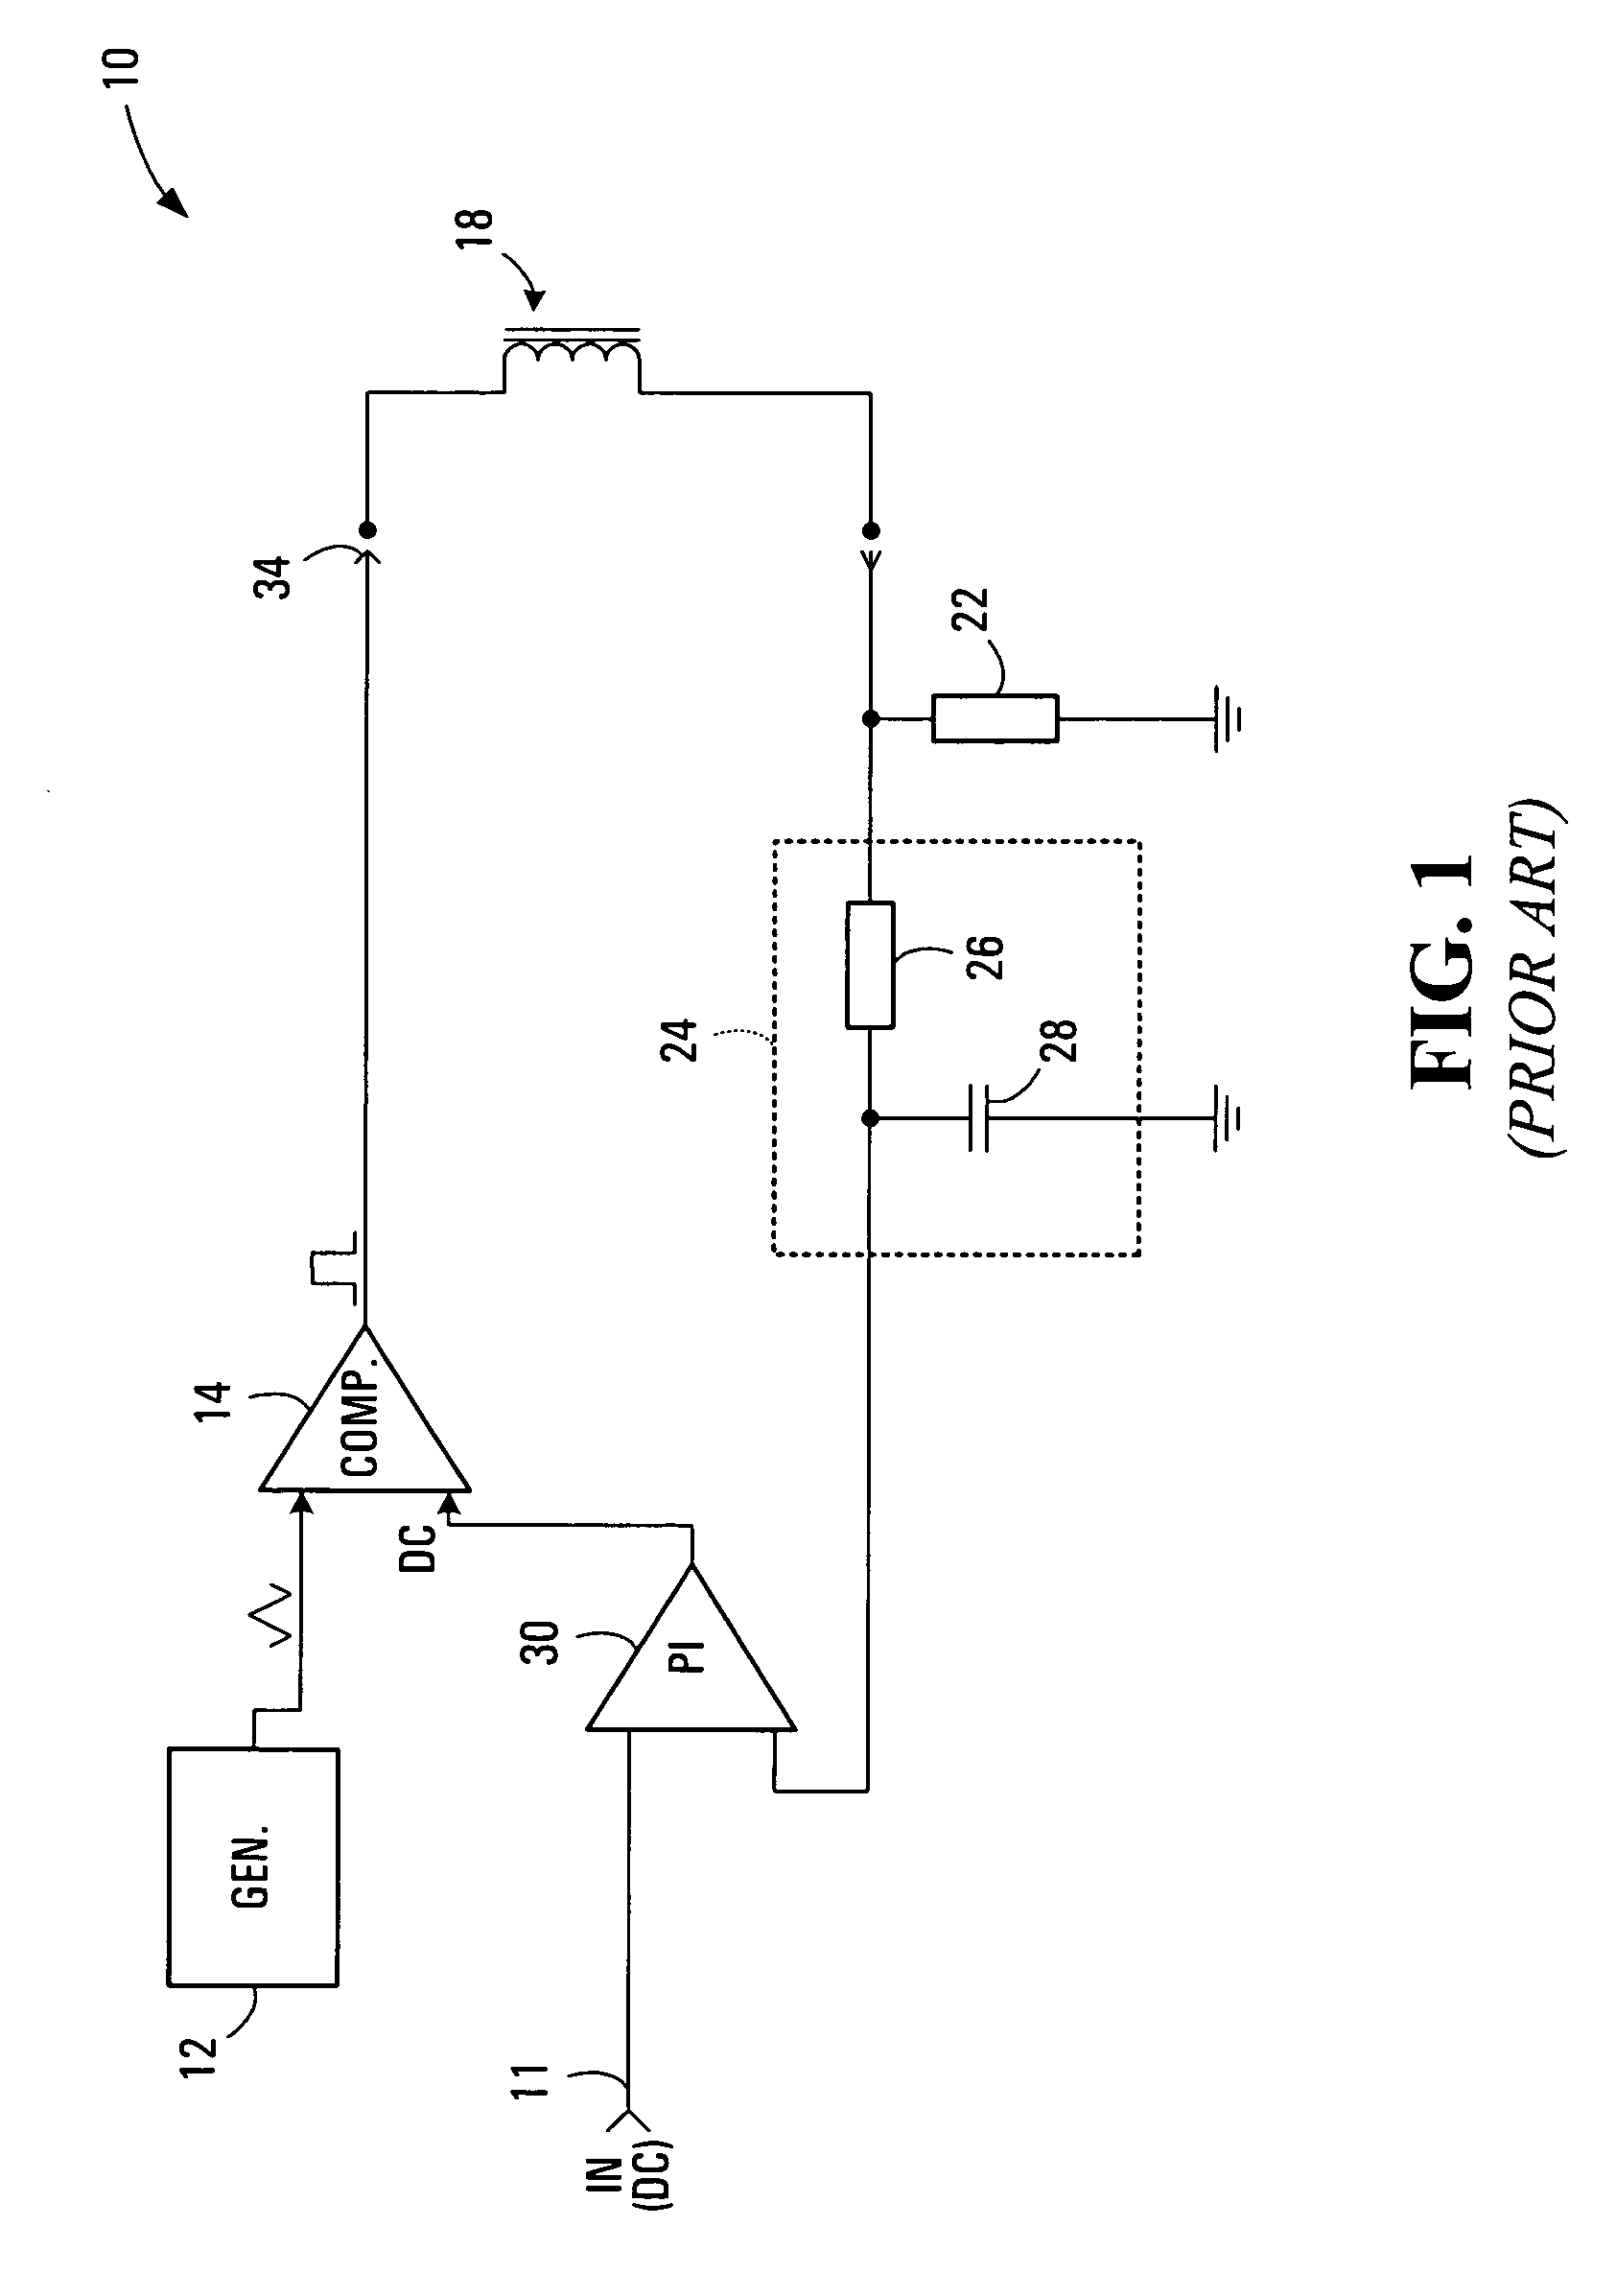 Current driver employing pulse-width modulation